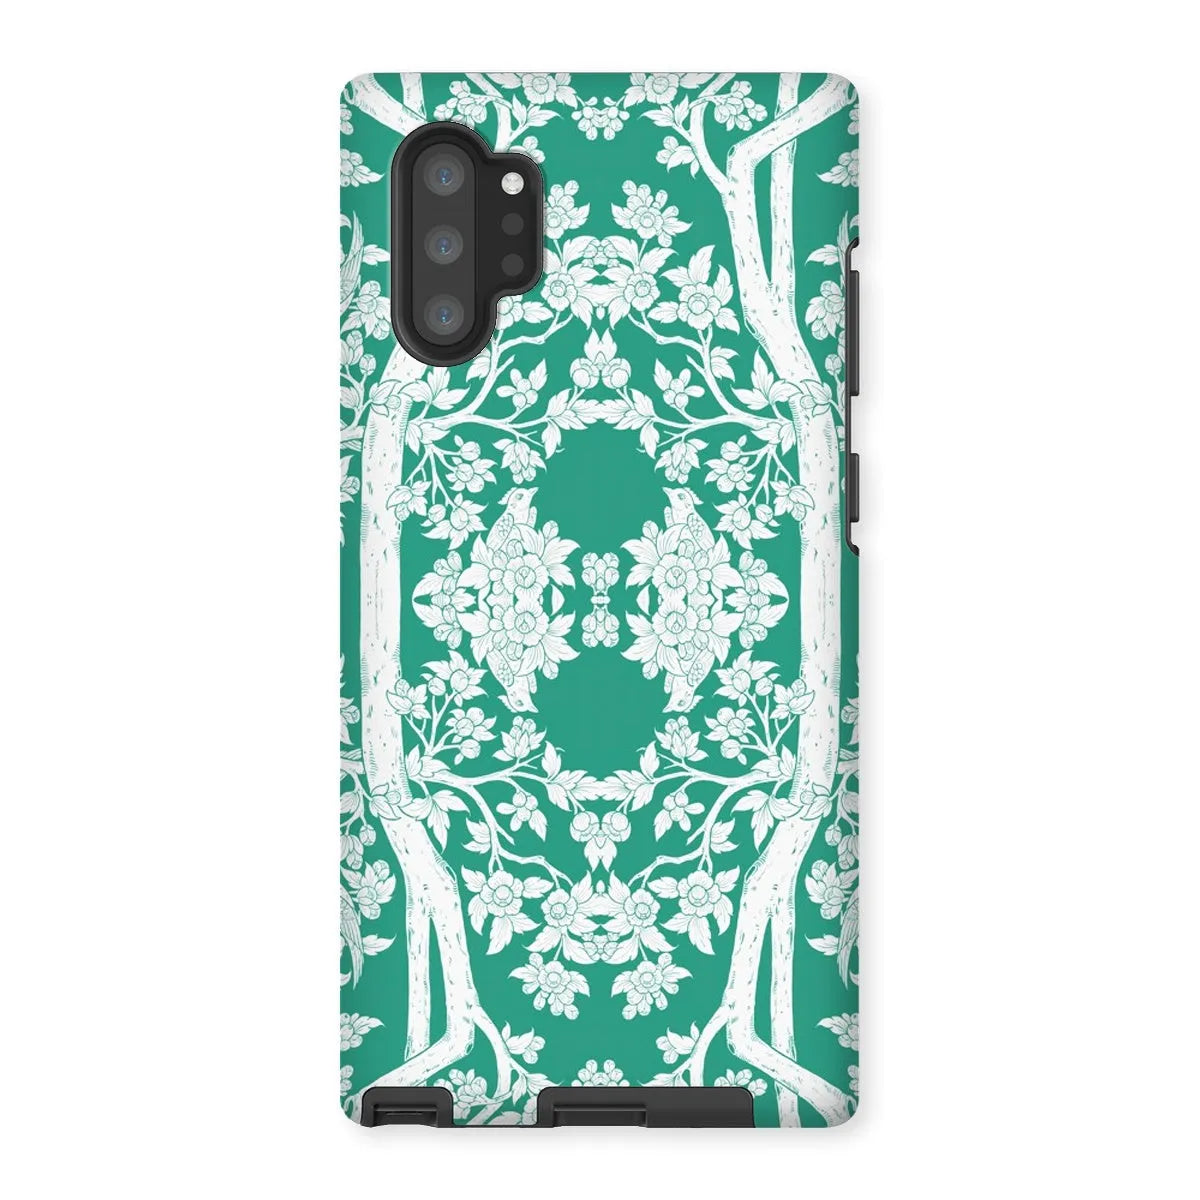 Aviary Green Aesthetic Pattern Art Phone Case - Samsung Galaxy Note 10p / Matte - Mobile Phone Cases - Aesthetic Art